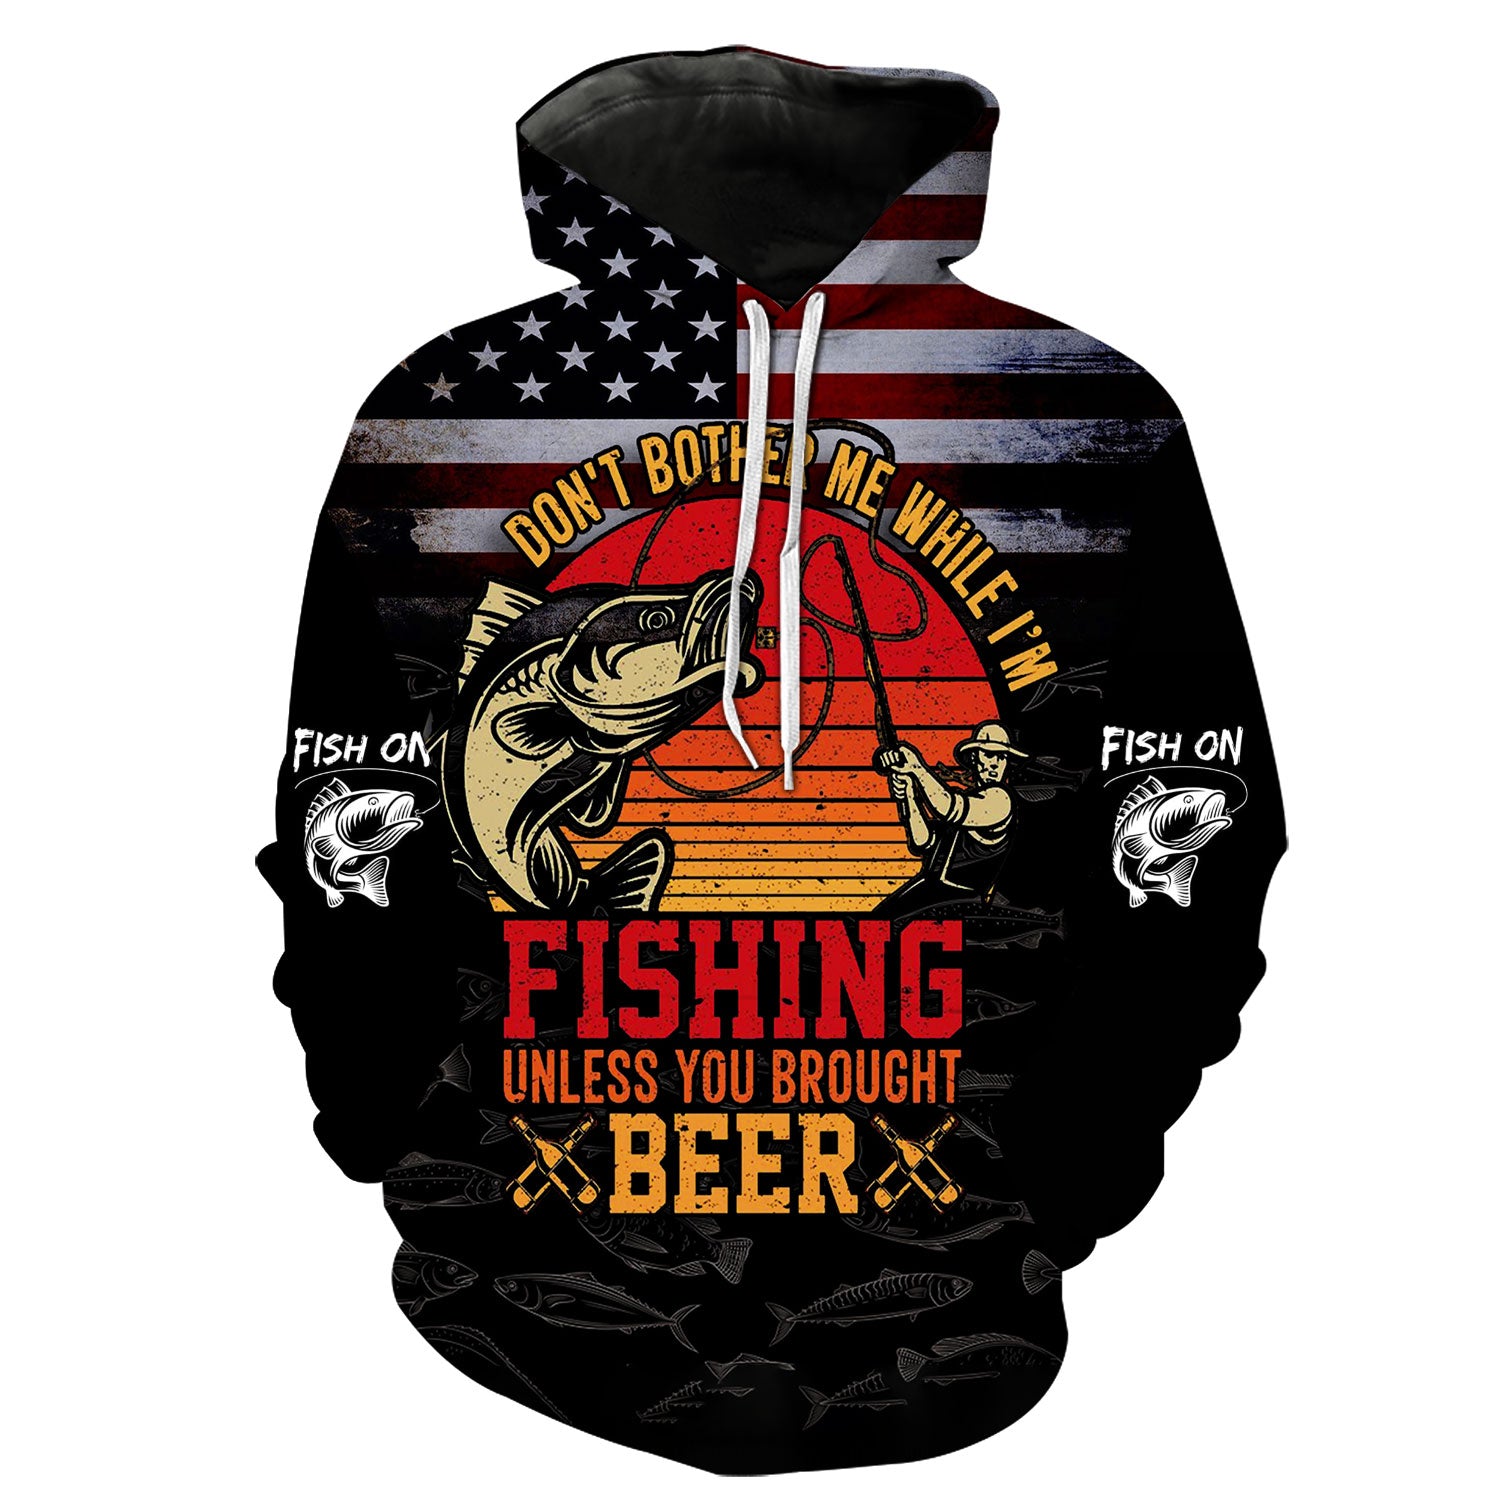 Don't bother me while I'm Fishing - Fish on Hoodie